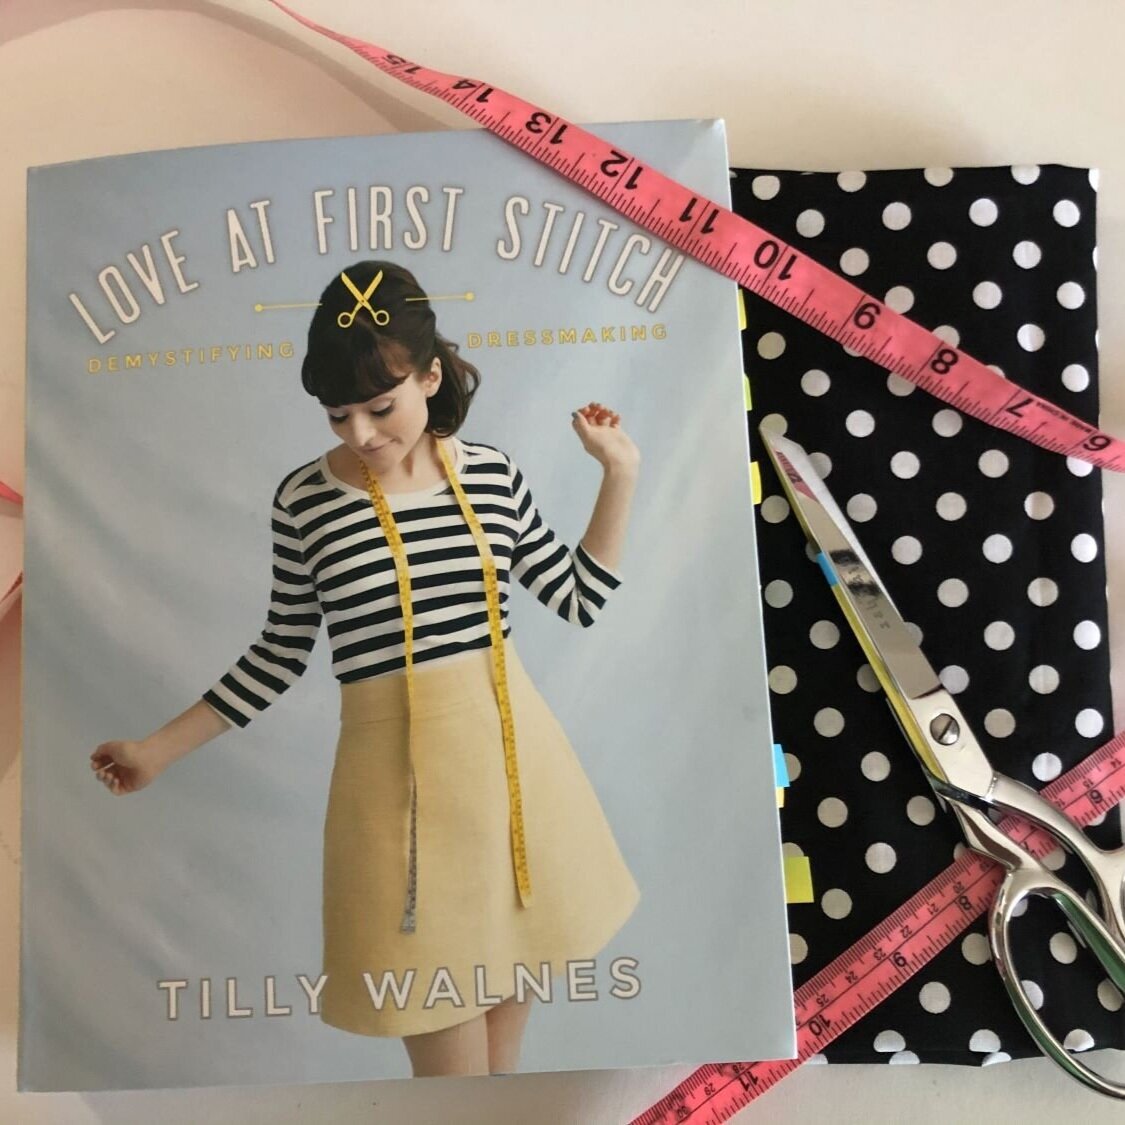 Tilly and the Buttons: Five Tips for Threading a Sewing Machine Needle